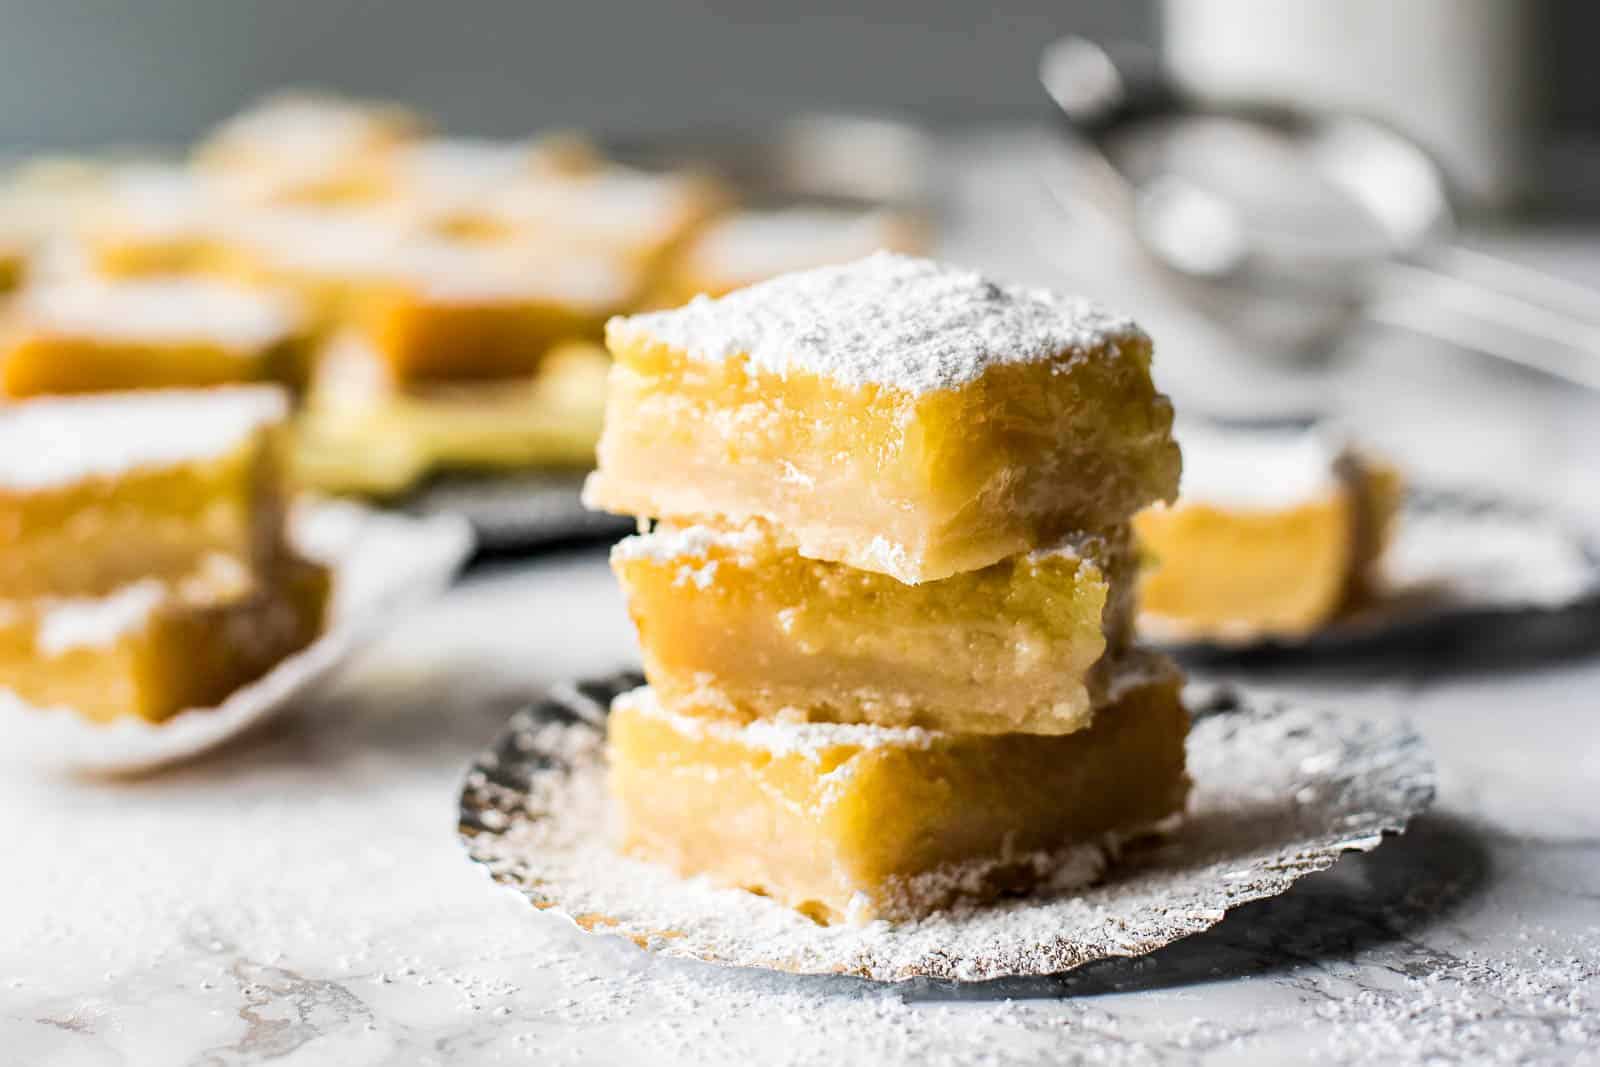 A stack of three lemon bars on a plate with more lemon bars in the background.